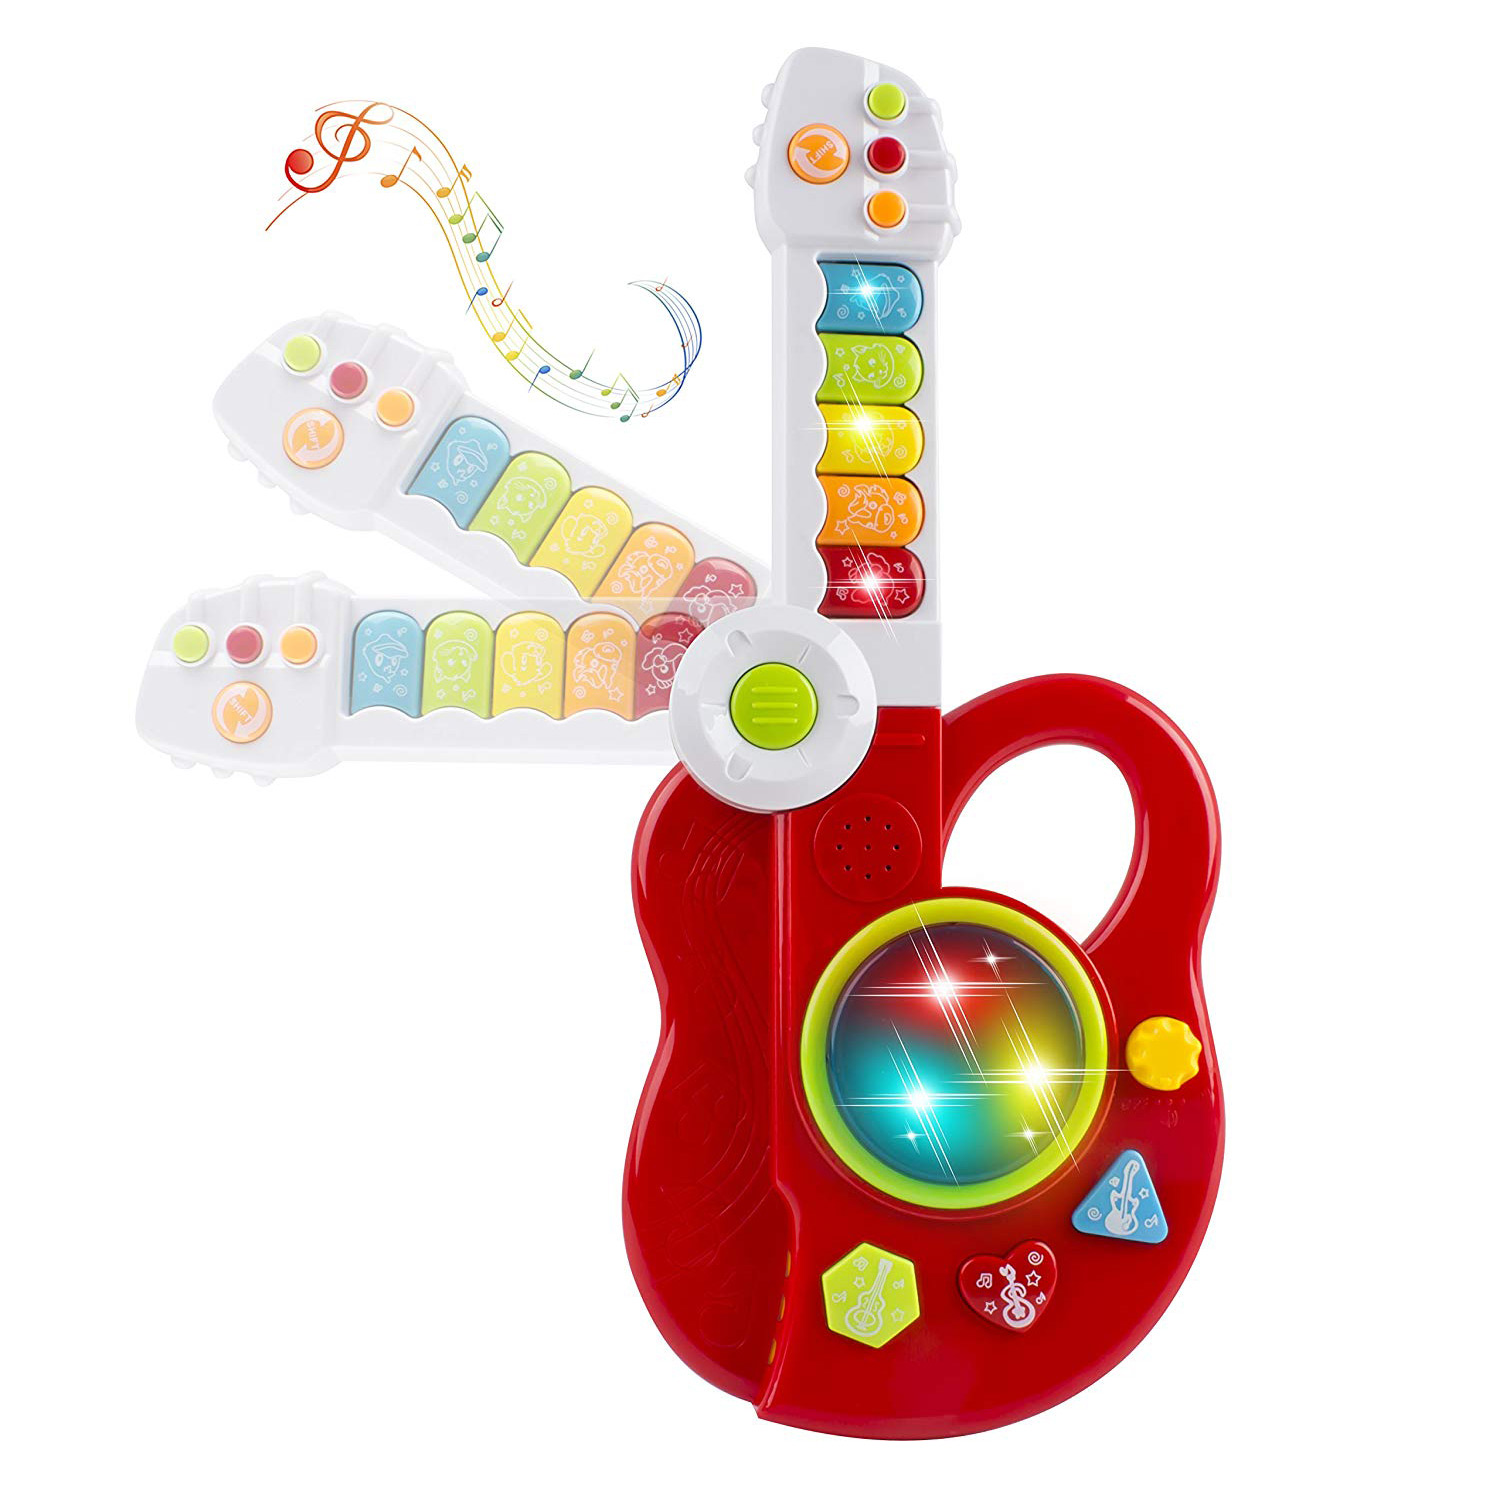 Toy Electric Guitar 3-in-1 With Keyboard And Jazz Drum 3D Lights Up Kids Educational Musical Instrument Playset Vibrant Sound Music And Colors Easy To Use Great For Childrenâ€™s Early Learning (Red)